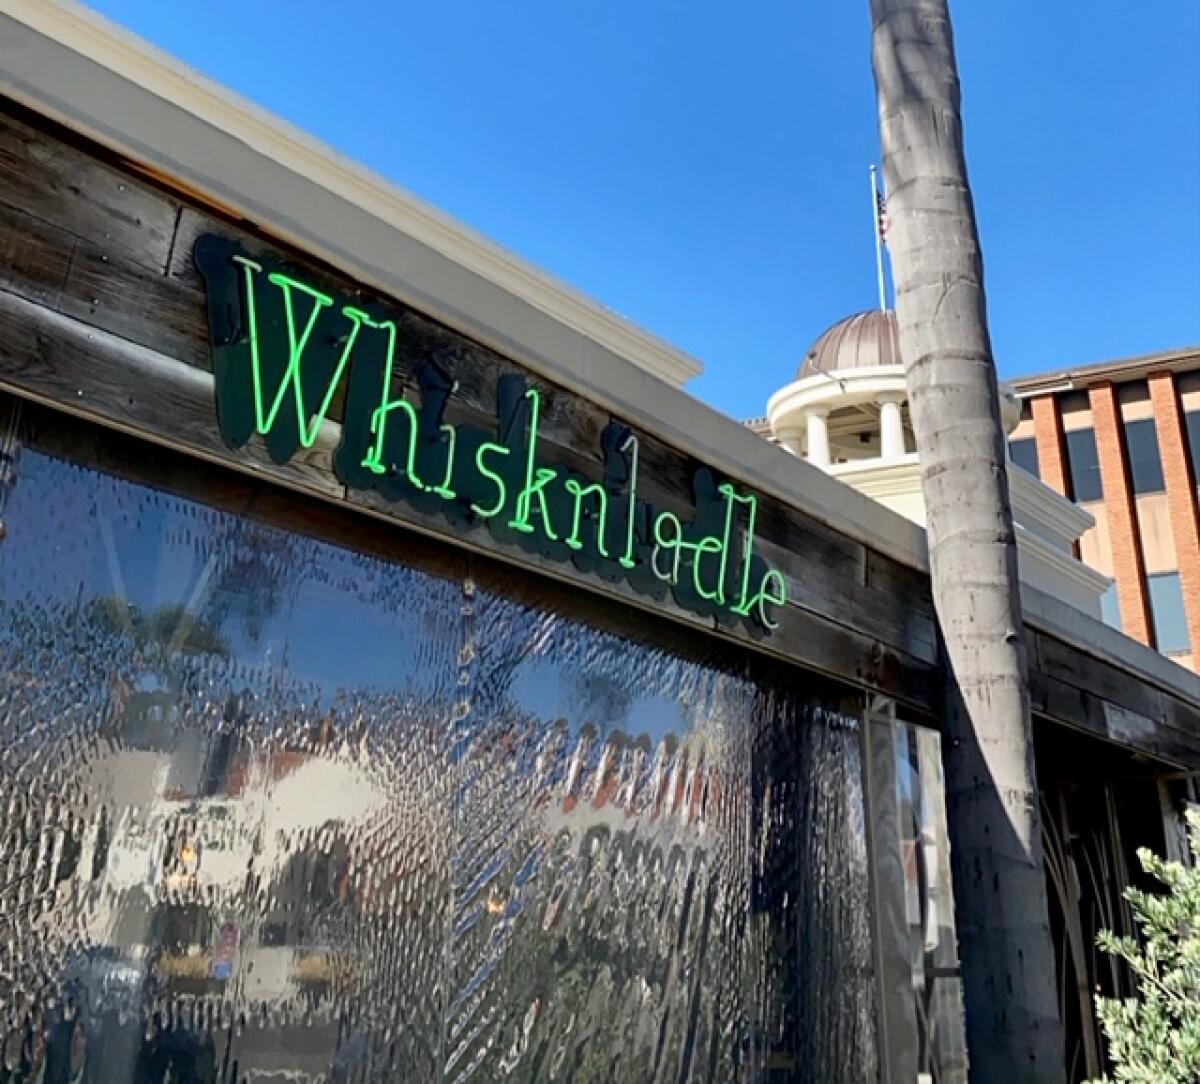 Whisknladle restaurant in La Jolla, closed since March because of coronavirus restrictions, announced May 20 that it will stay closed for good.